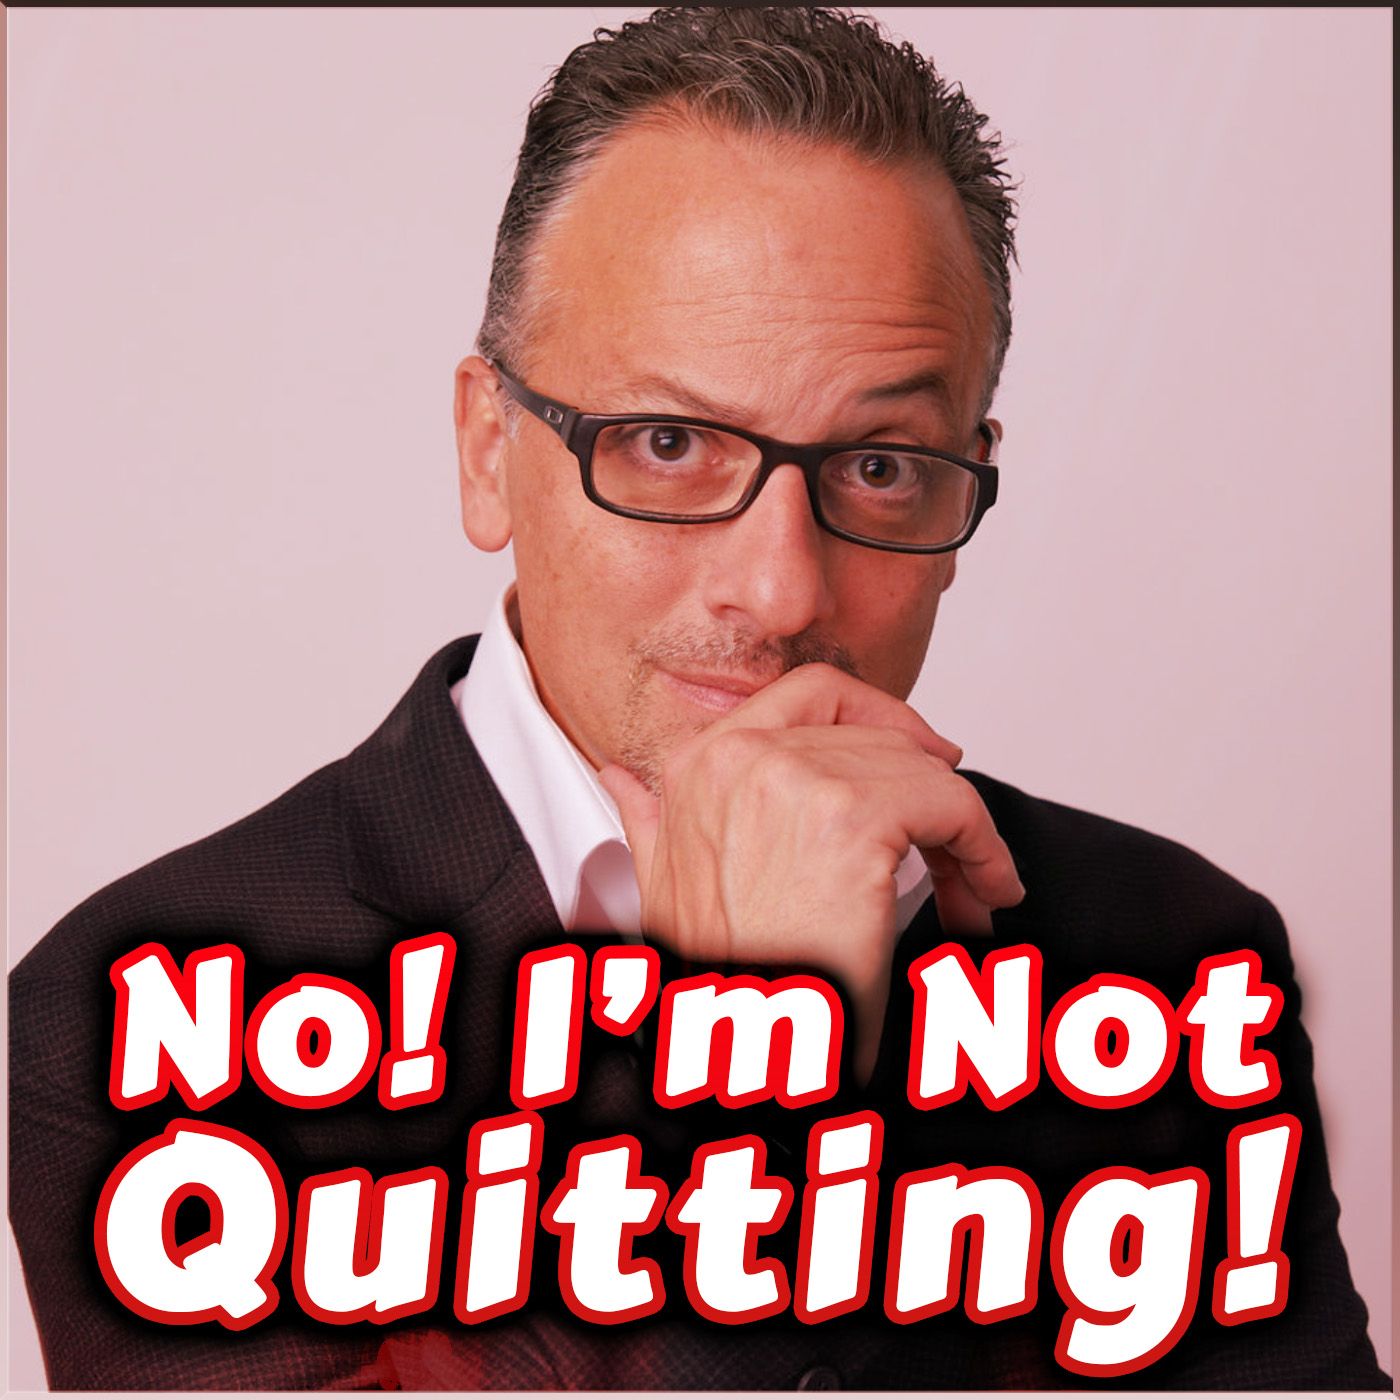 No! I’m Not Quitting!